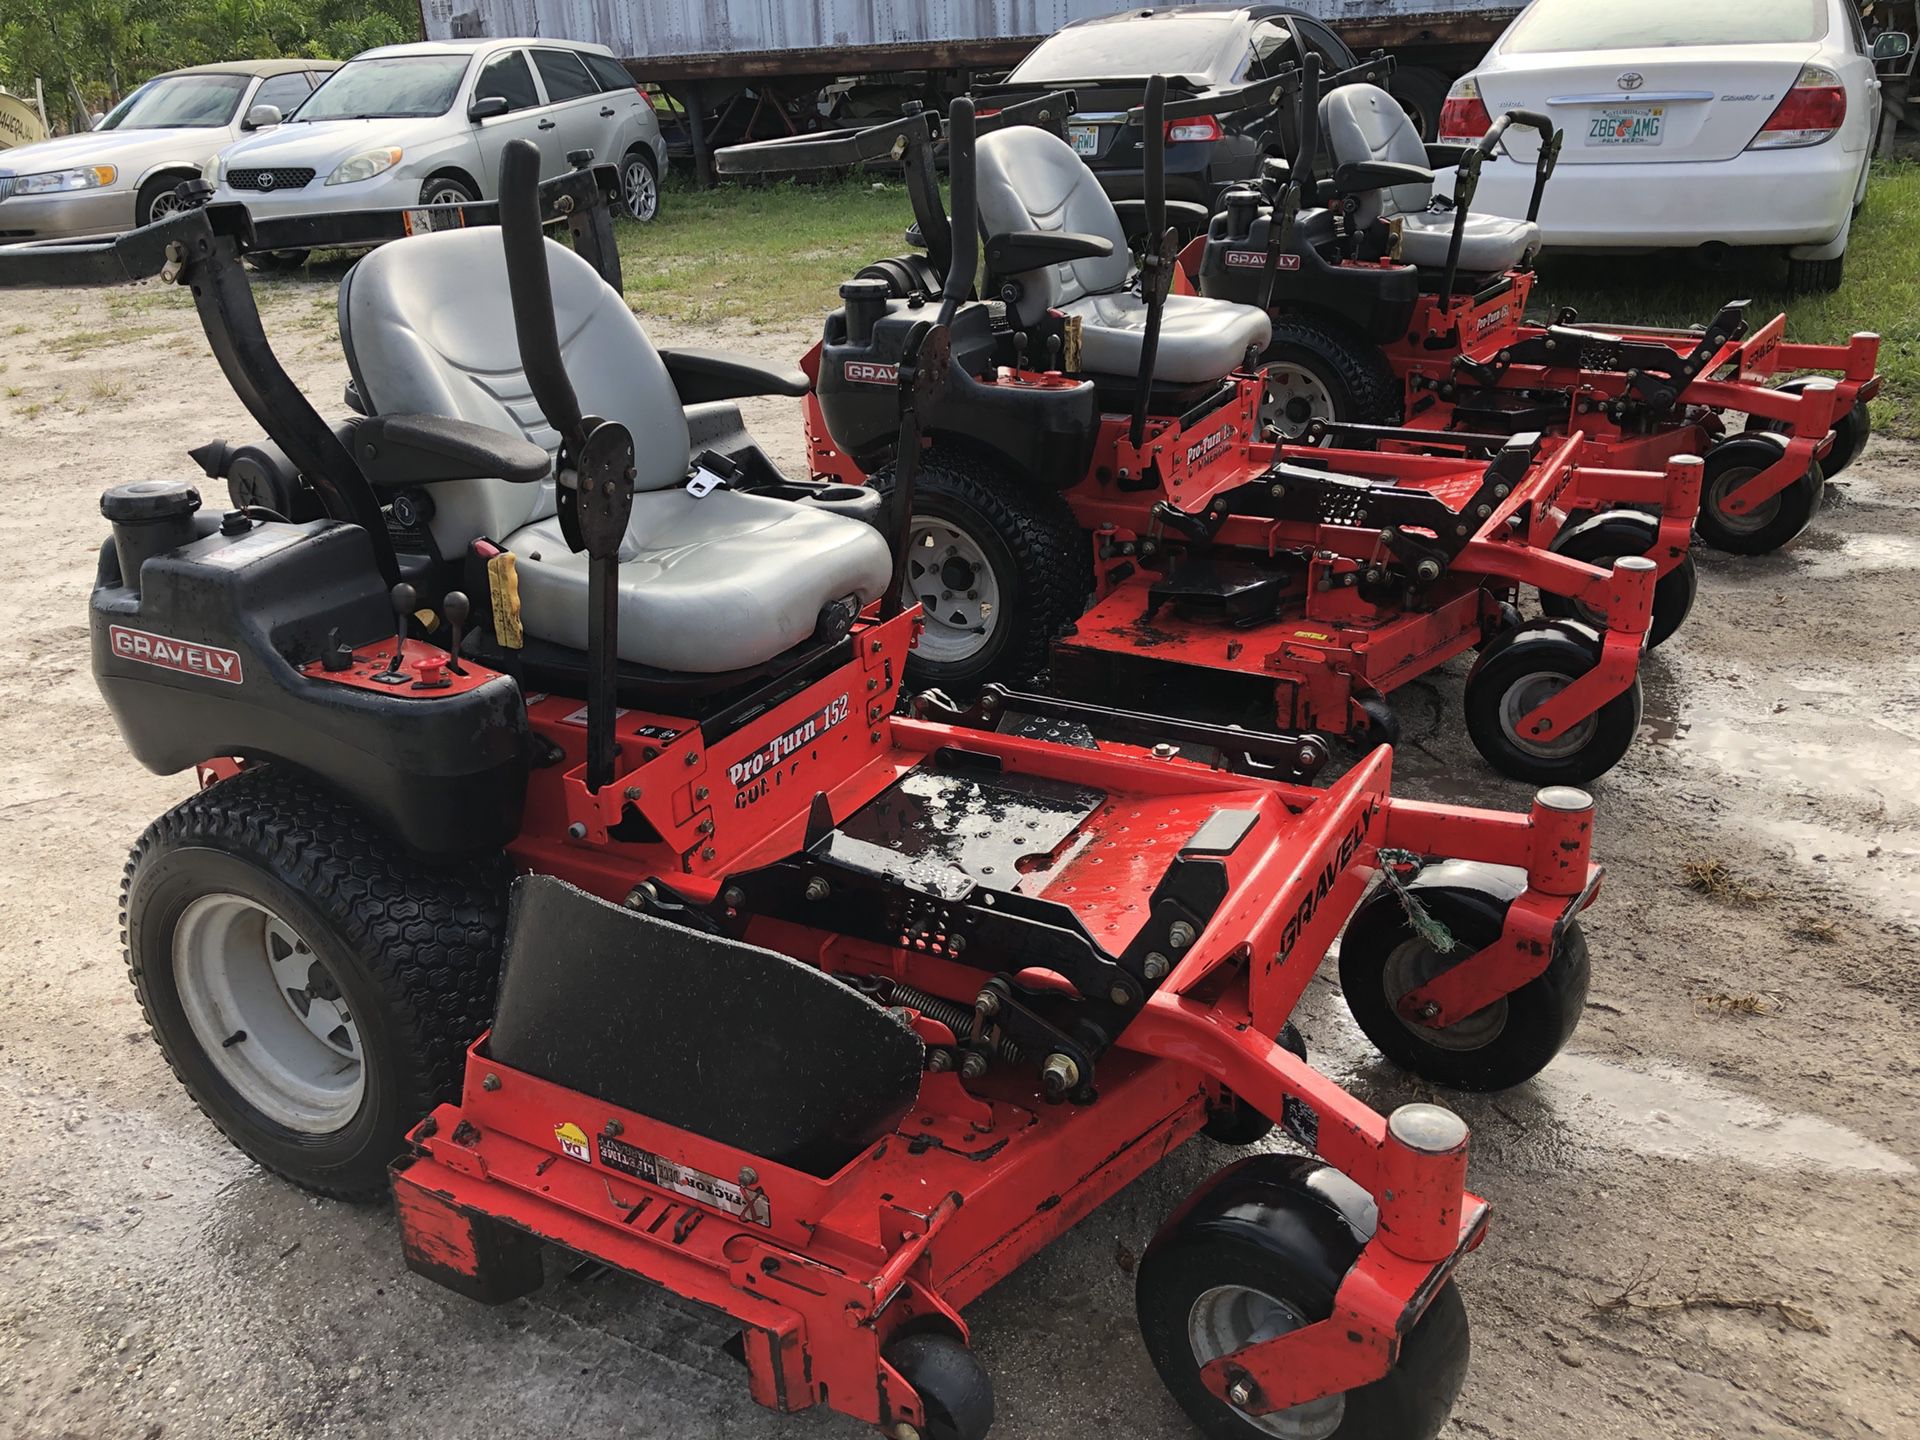 (3) 52 inch Hydro mowers commercial grade gravely